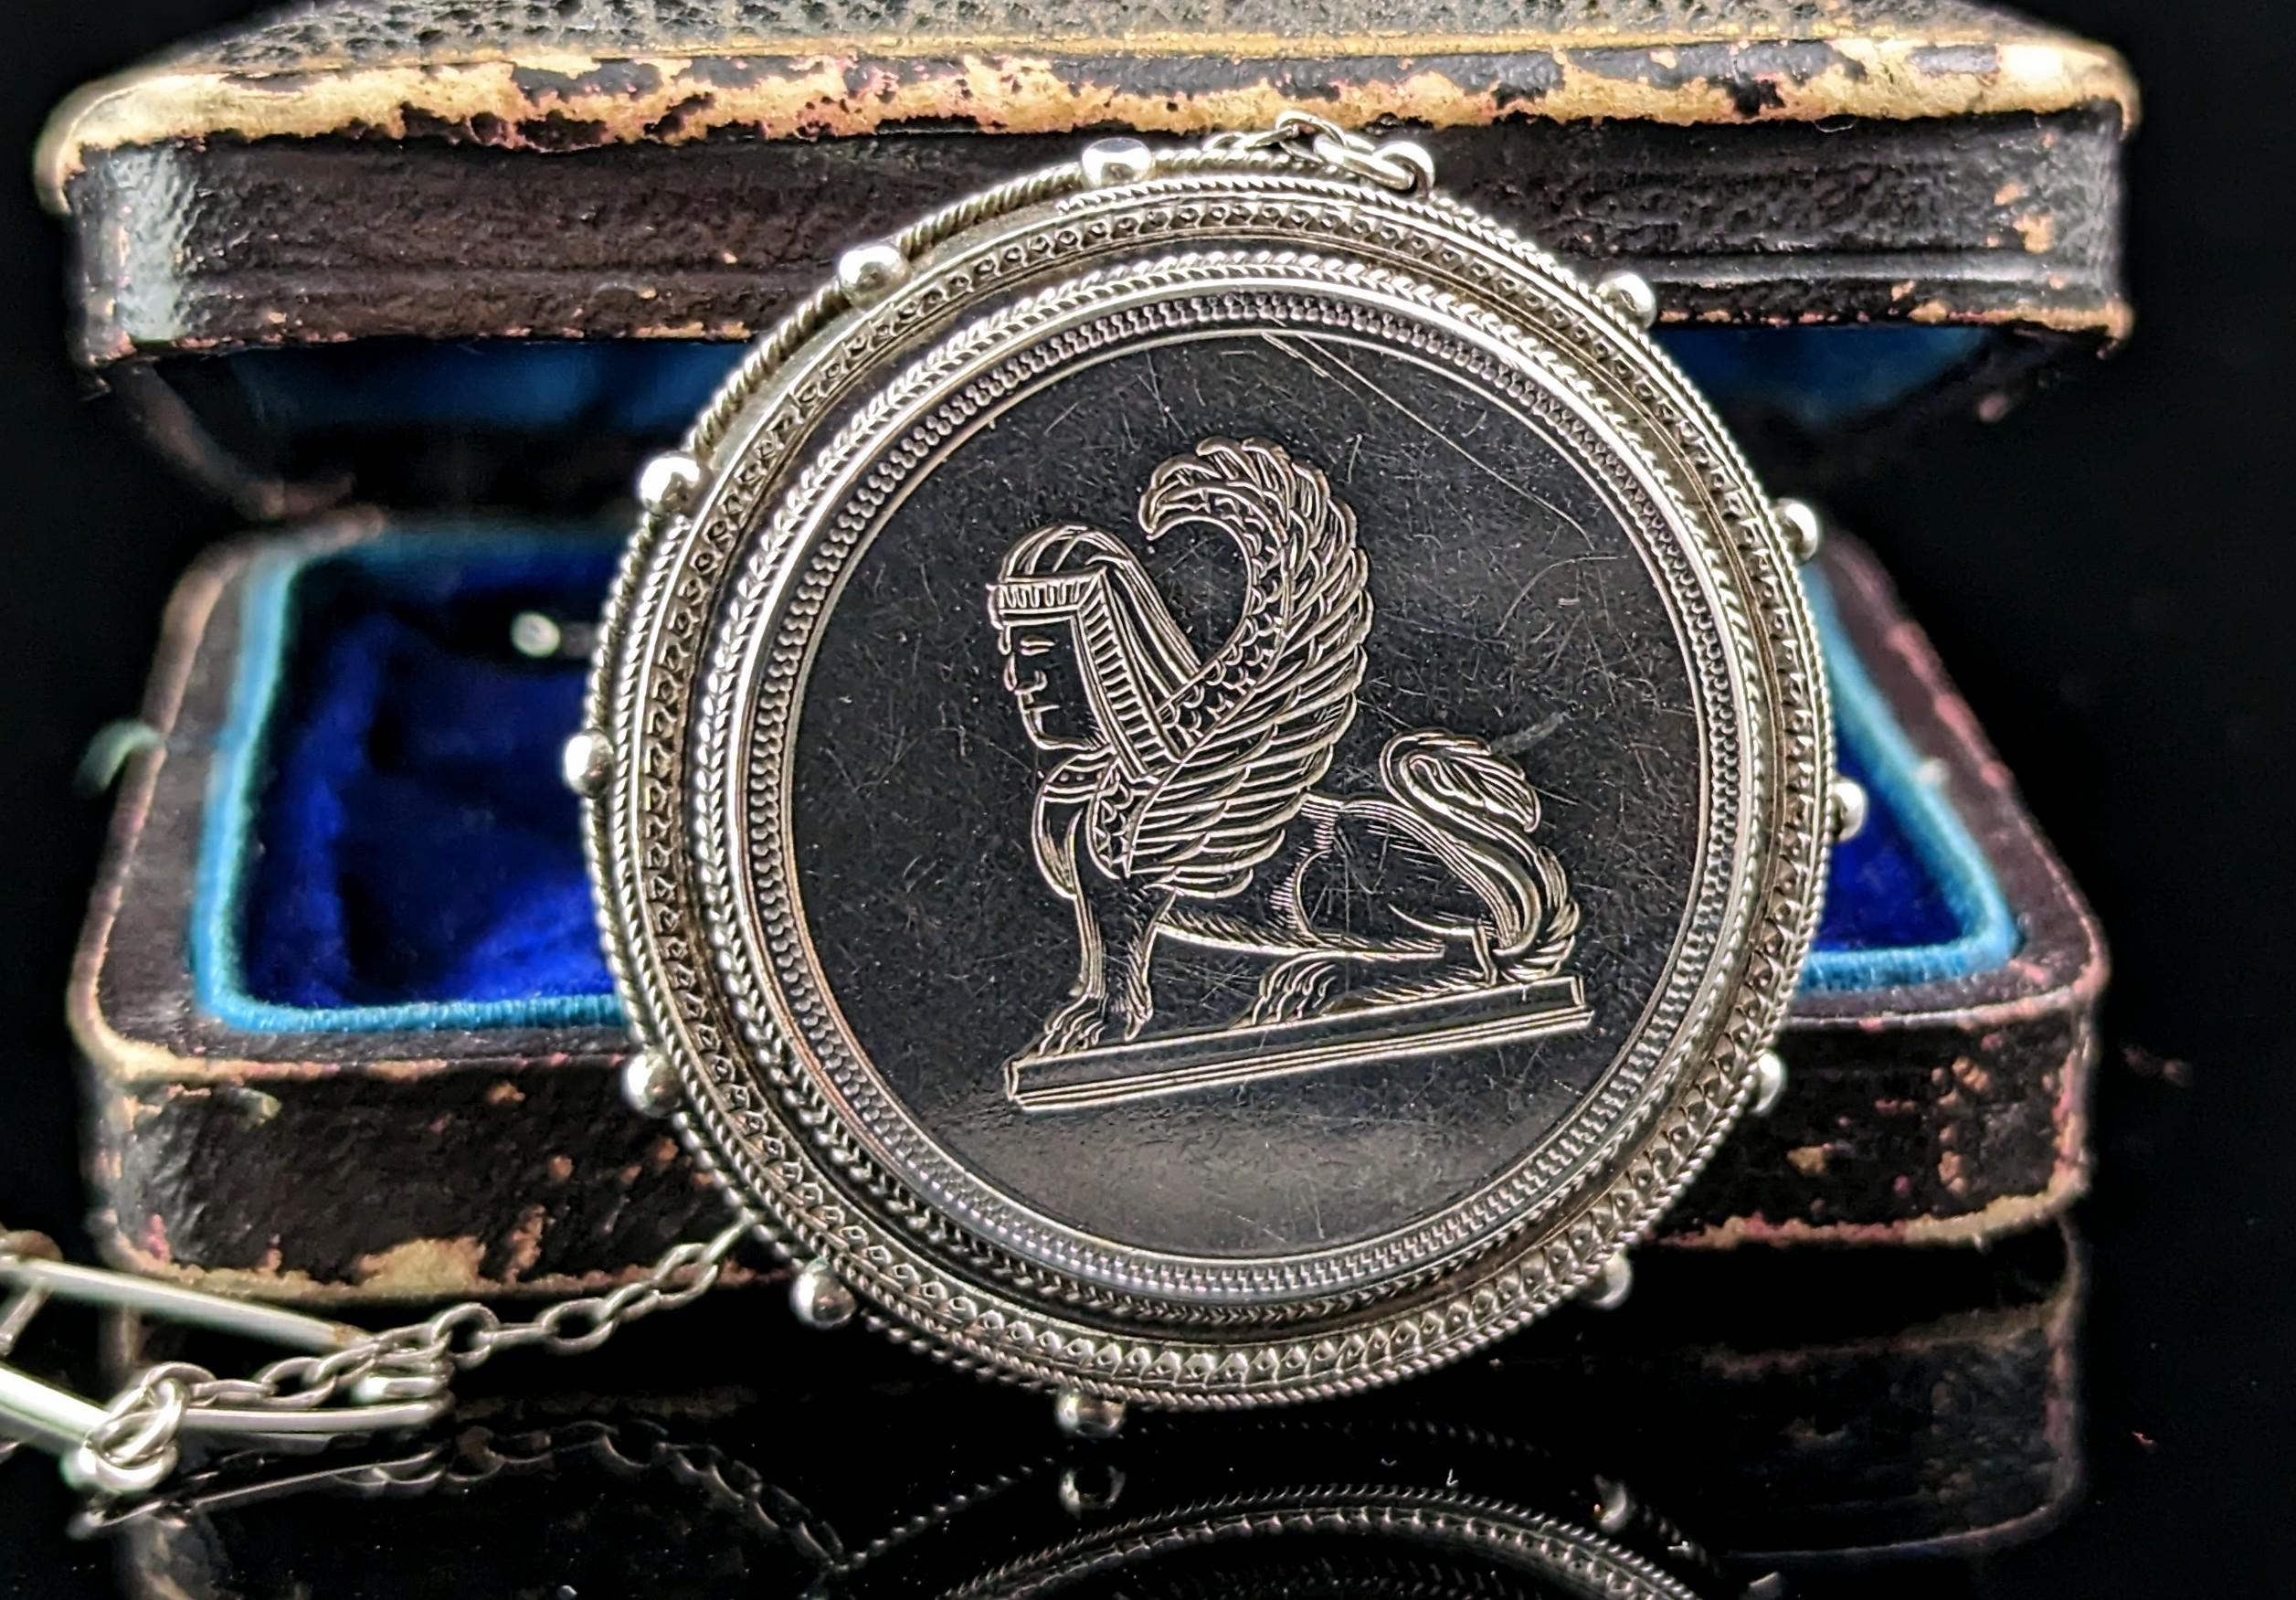 A scarce and unusual antique Victorian era brooch.

An Assyrian revival piece, probably obtained from global travels this brooch depicts a Lamassu.

A Lamassu was an ancient diety or originally a goddess of protection, usually a combination of;